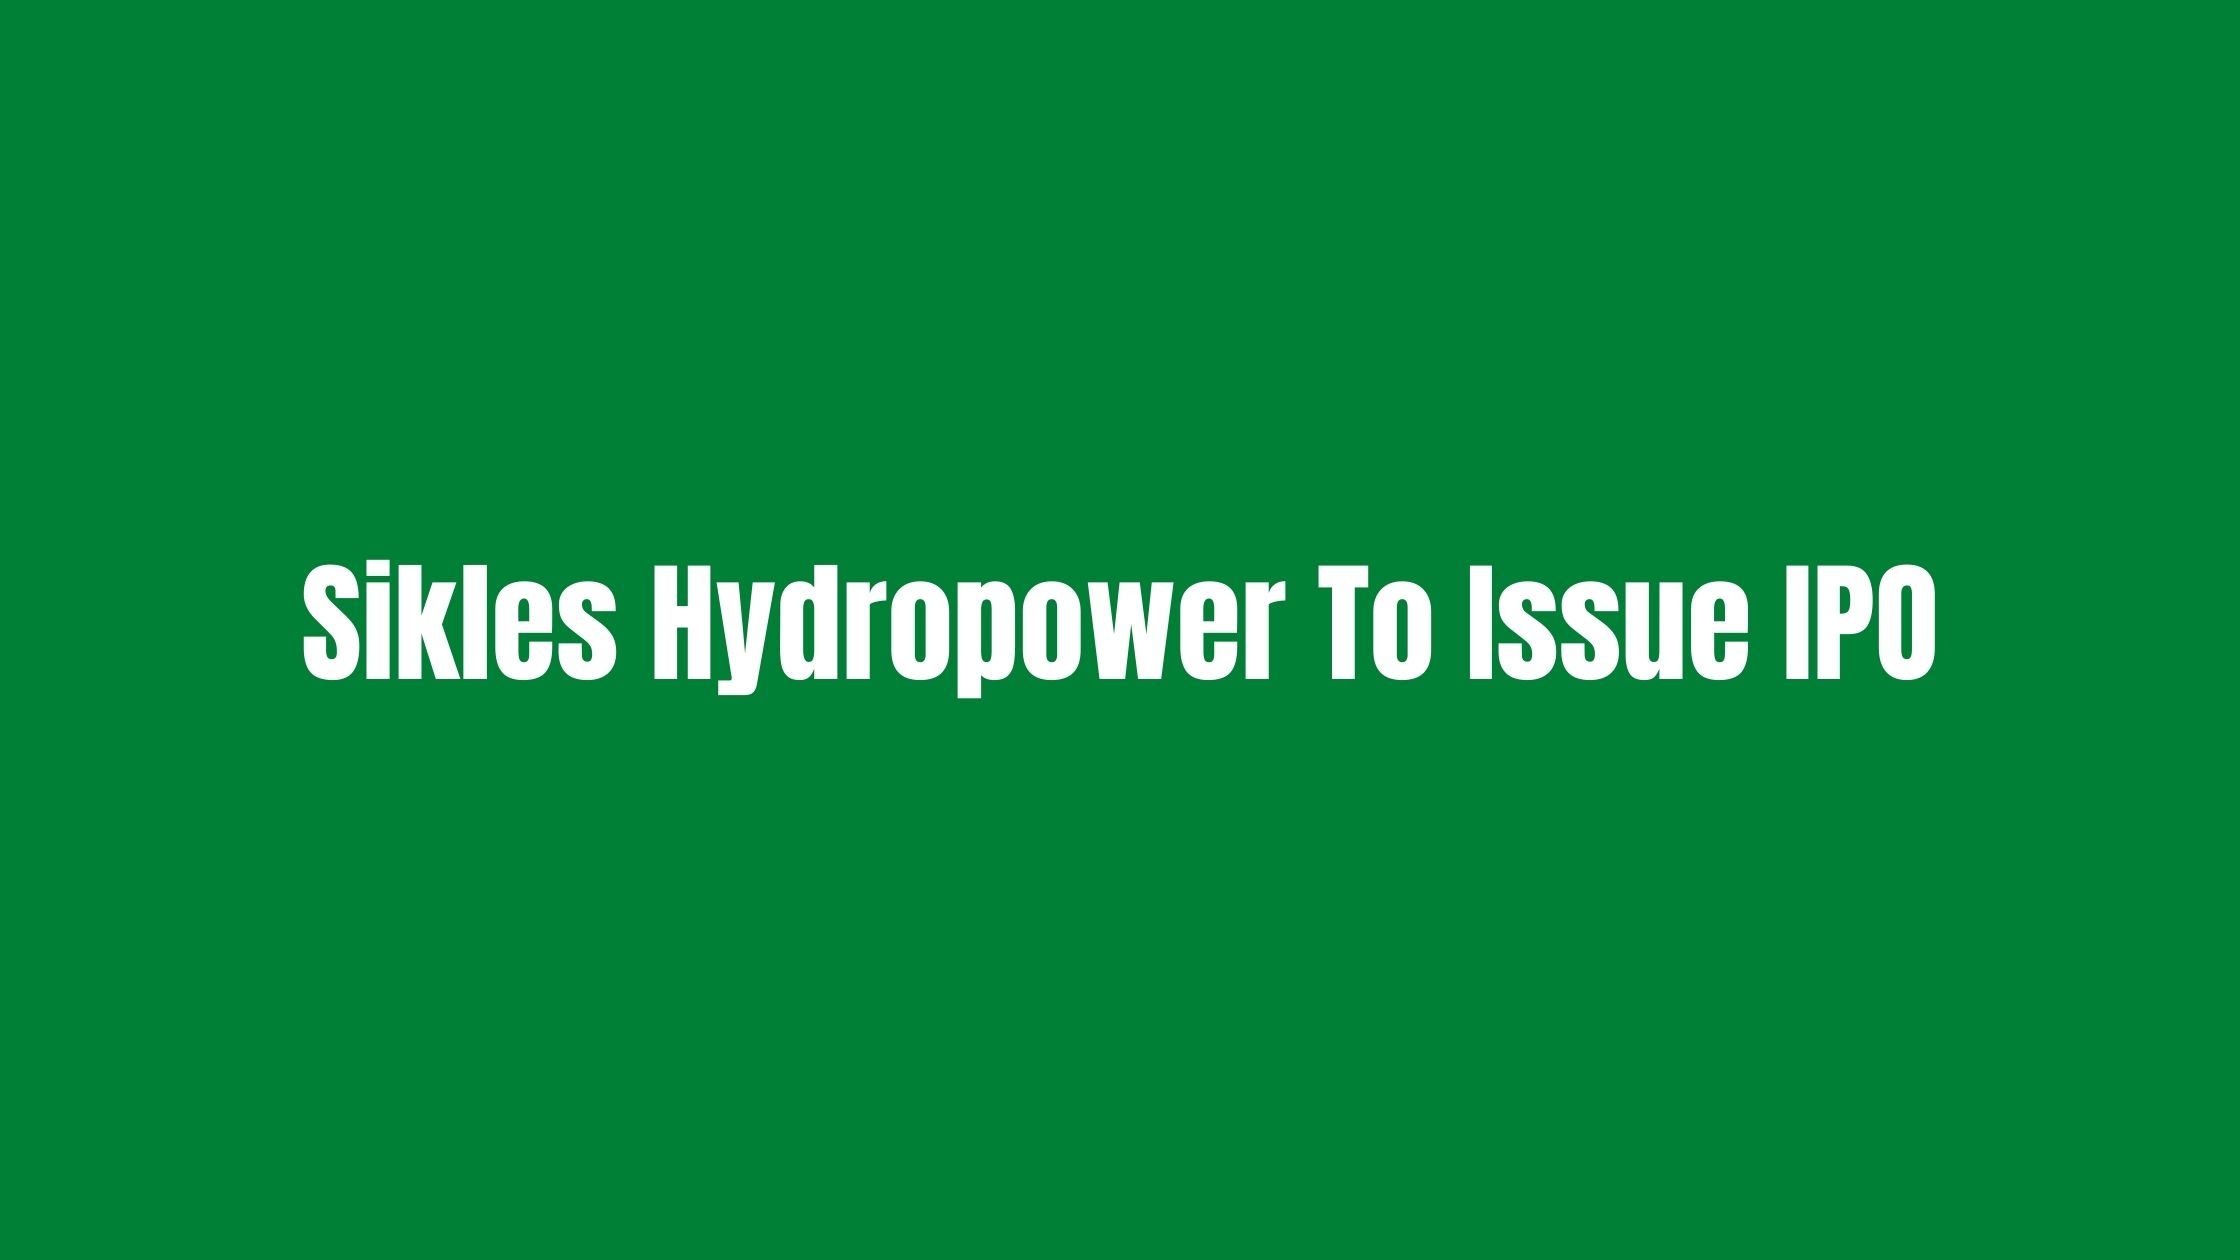 Sikles Hydropower To Issue IPO